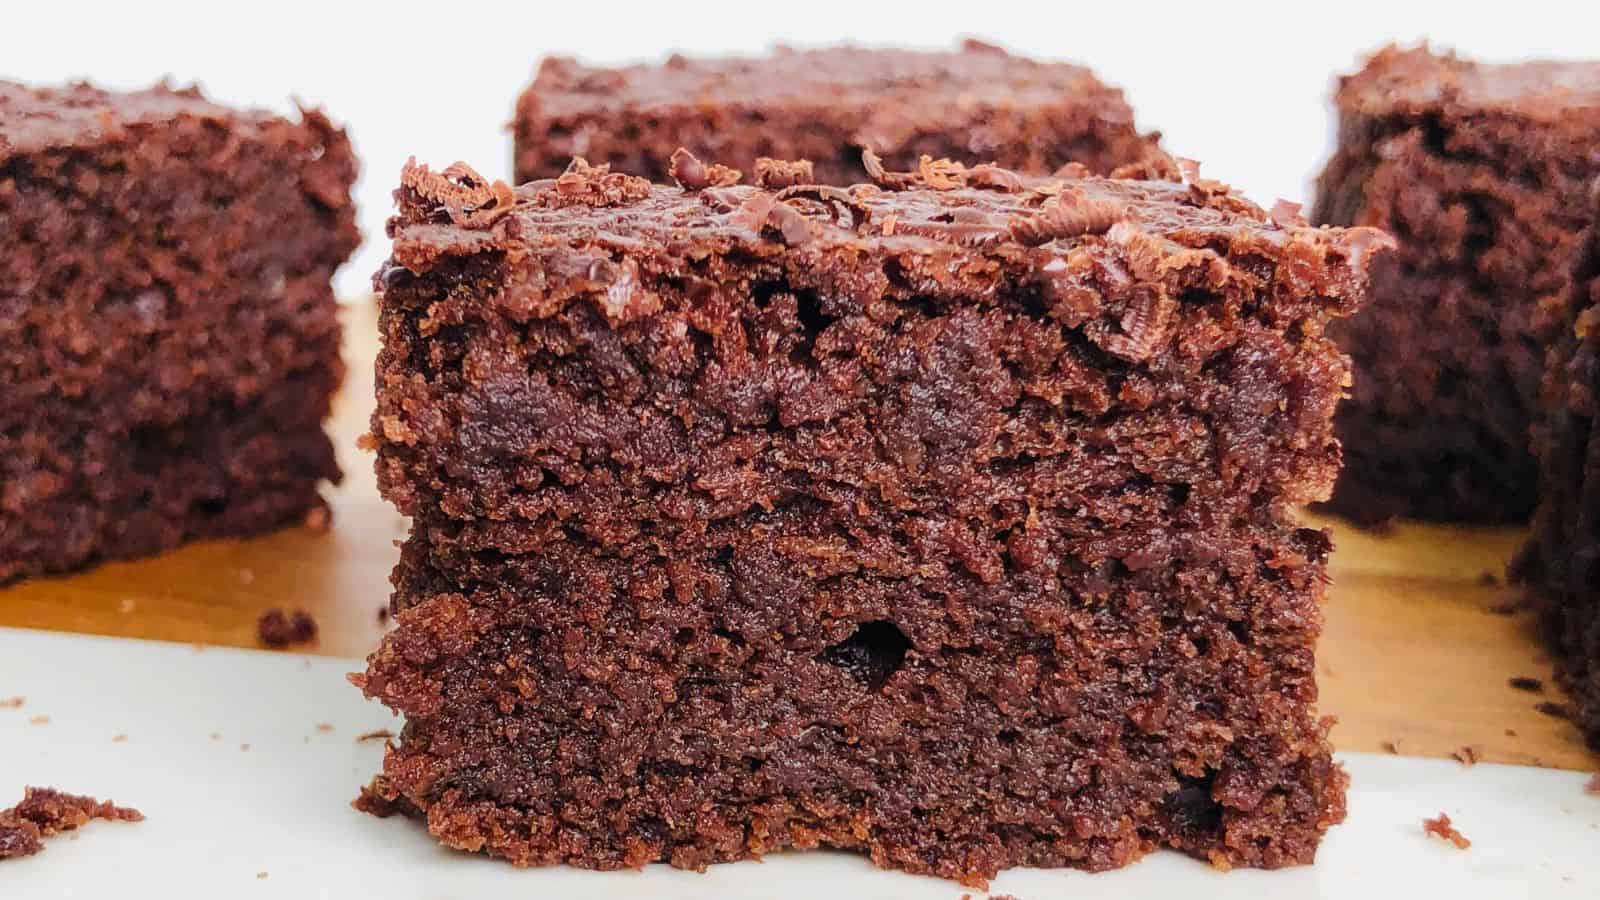 Close-up of a square cut chocolate brownie with a rich, dense texture, resting on a light-colored surface. More brownies are visible in the background.